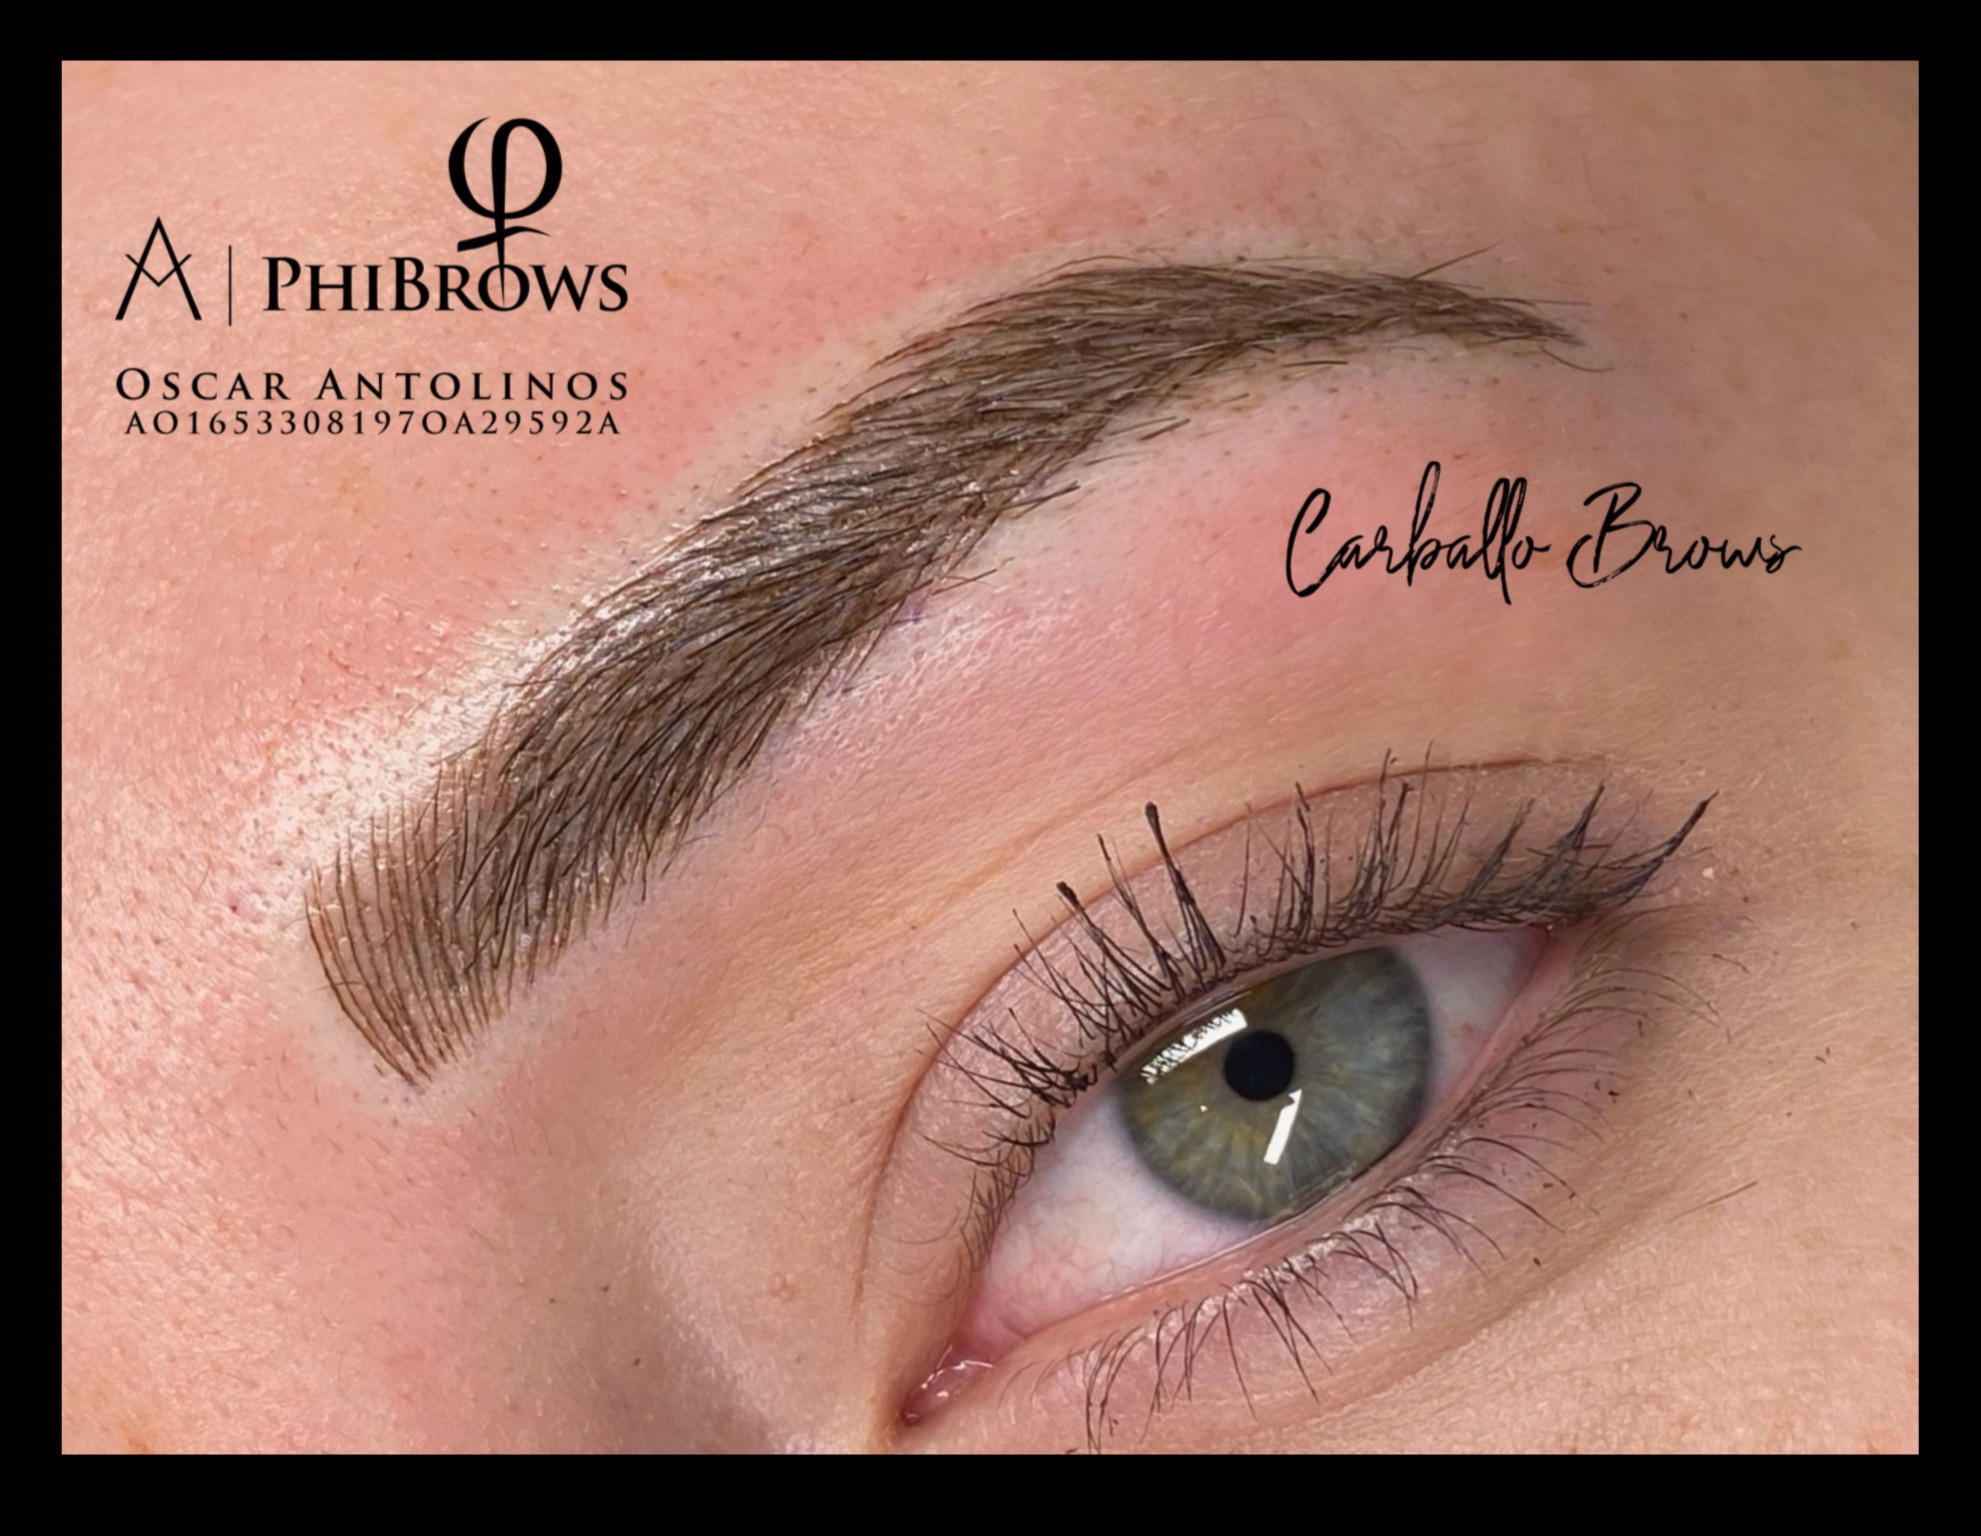 Images Carballo Brows